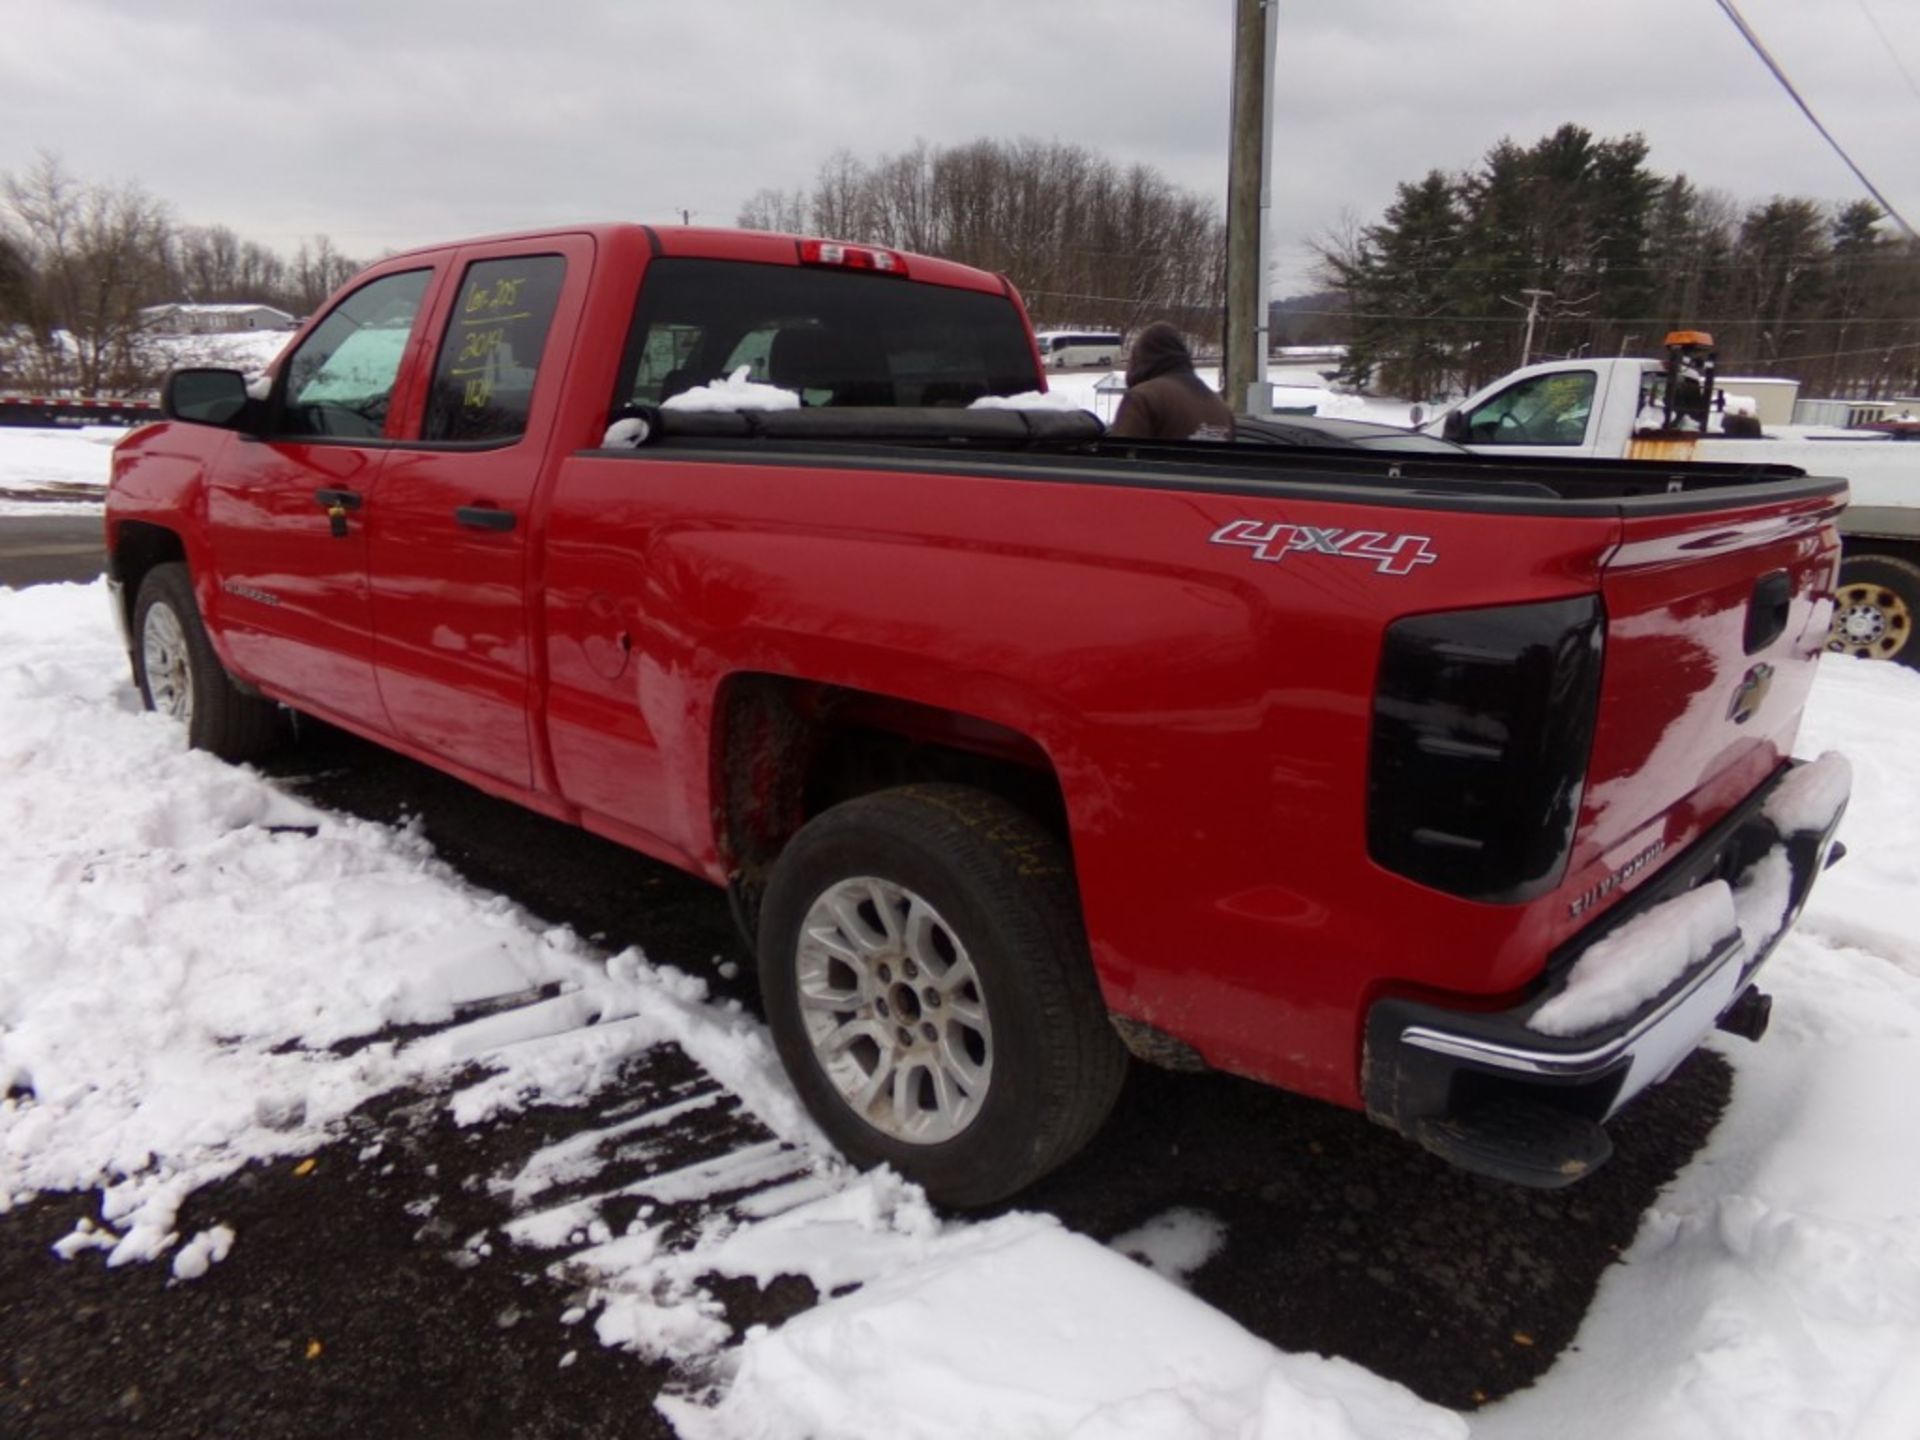 2014 Chevrolet Silverado 1500 4X4, Double Cab, Aftermarket Tail Lights, Toneau Cover, W/T, Red, - Image 2 of 11